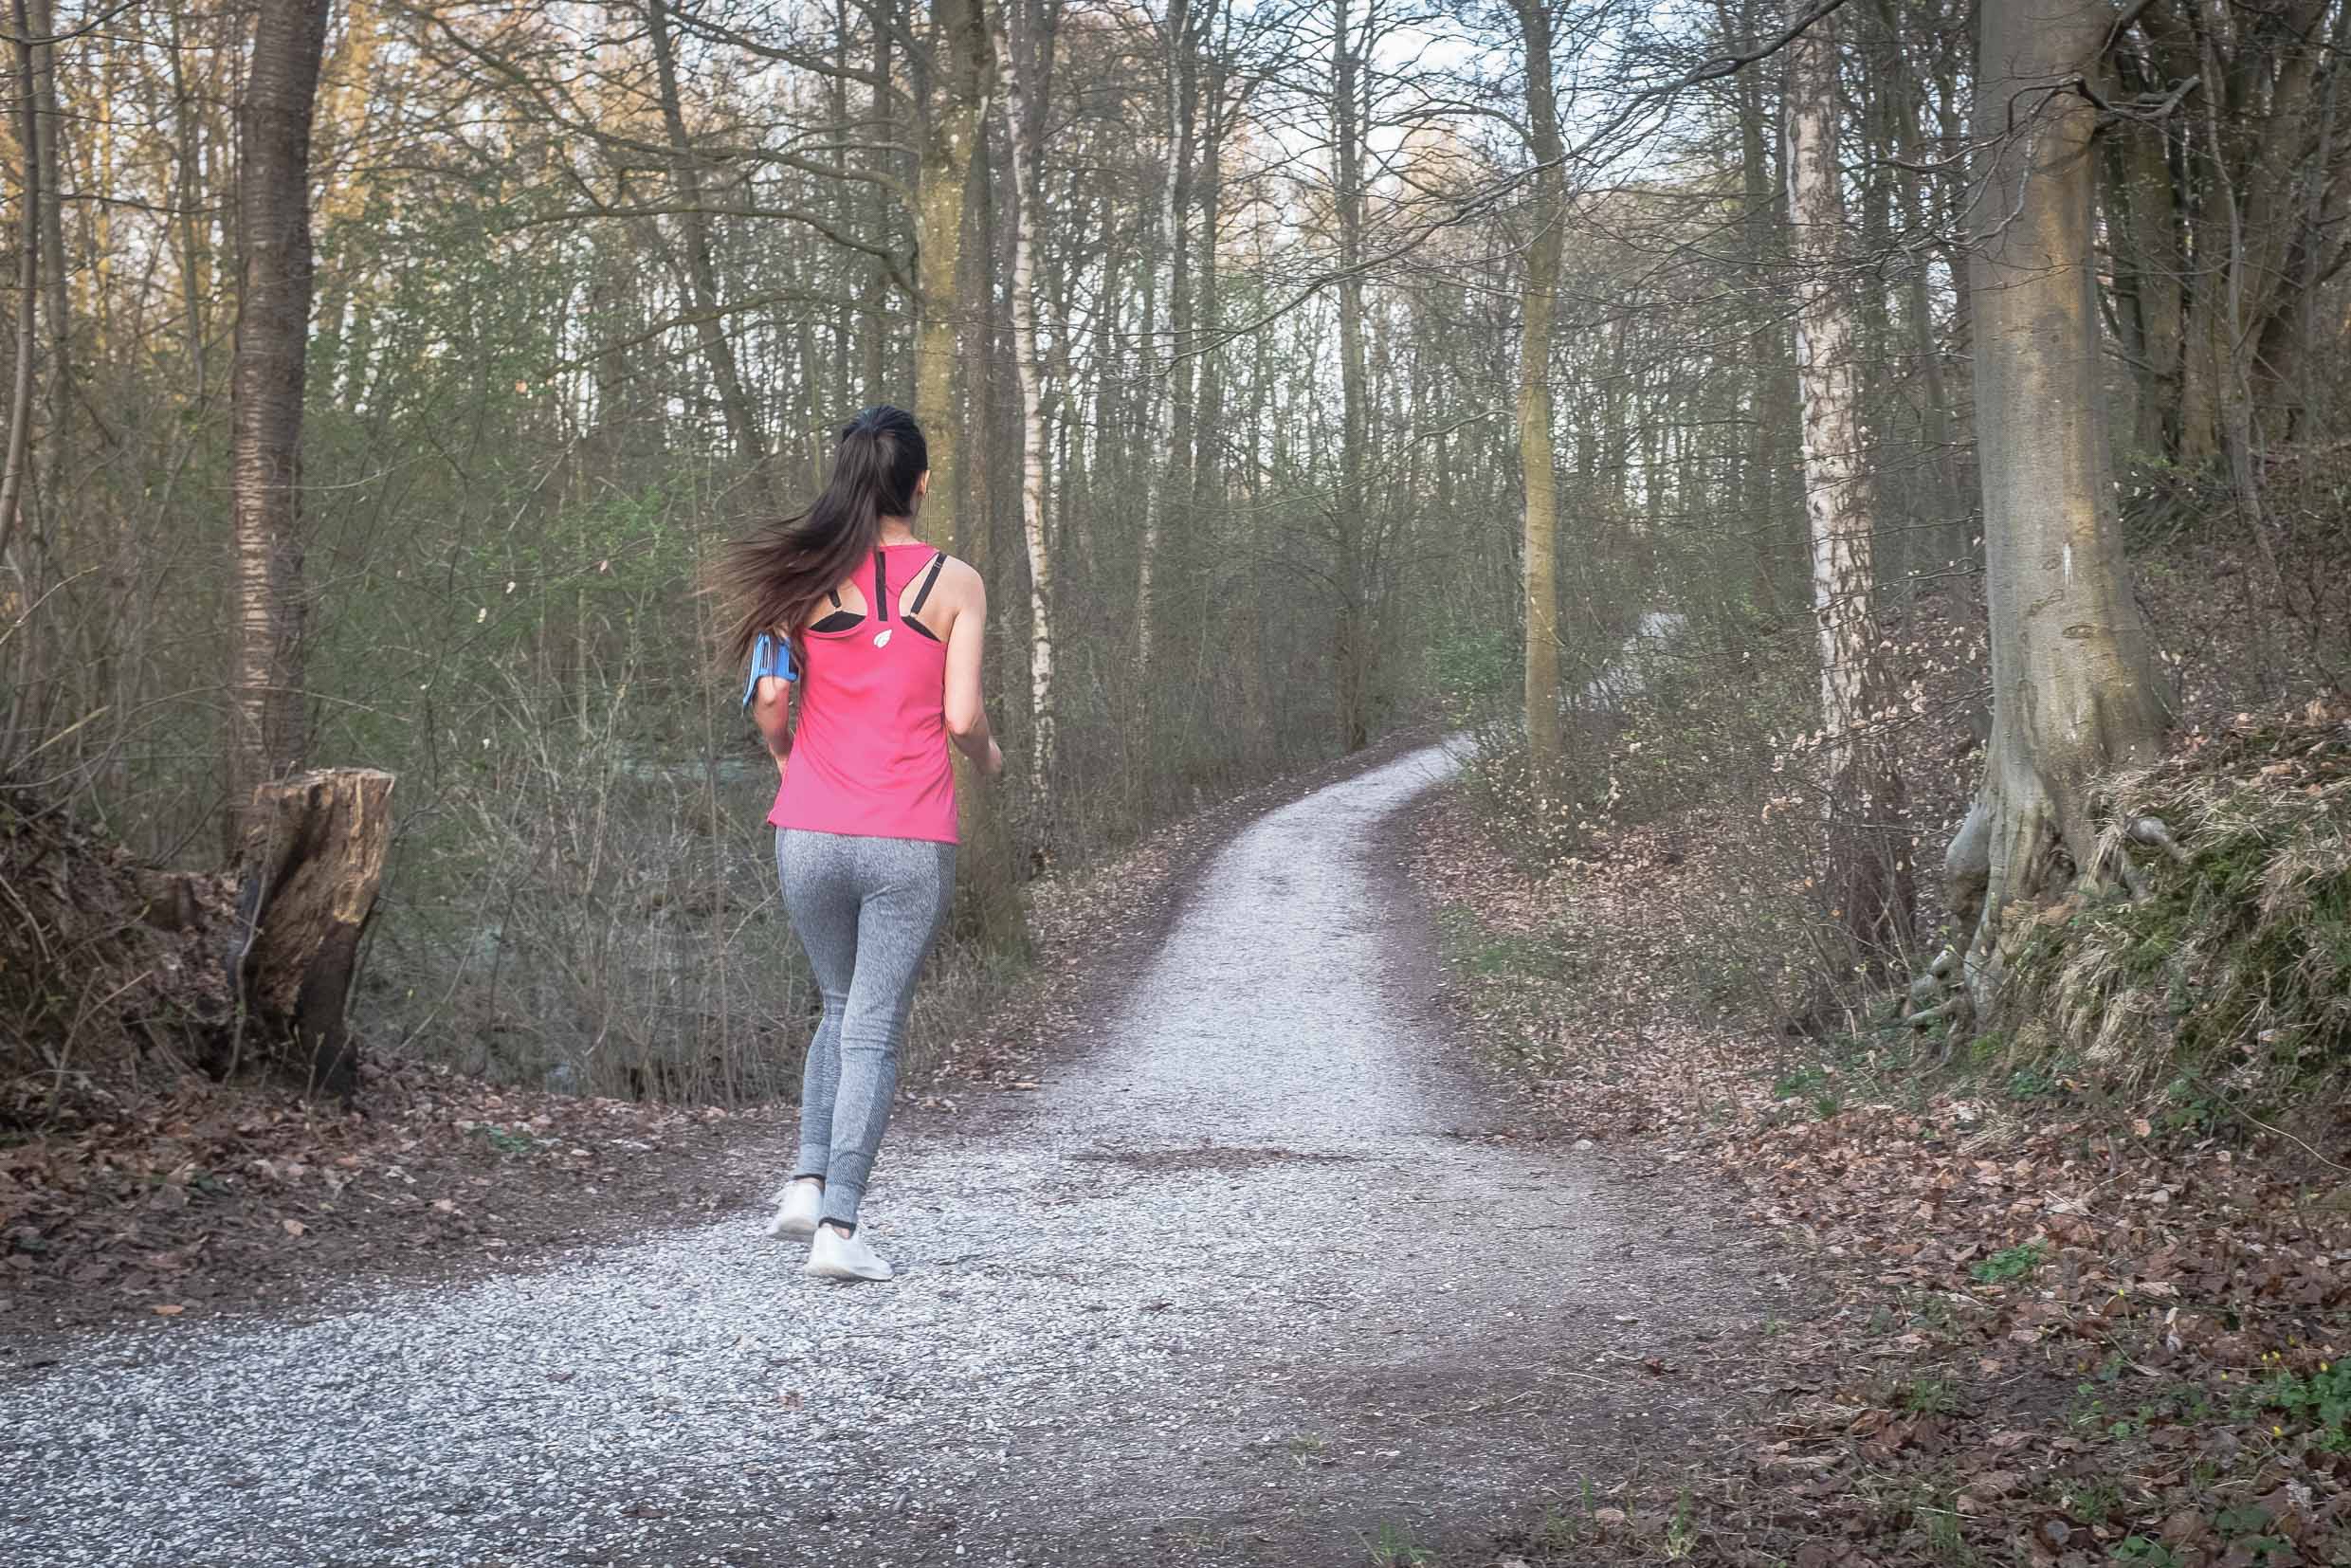 Arina running while listening to music on a gravel path in a forest